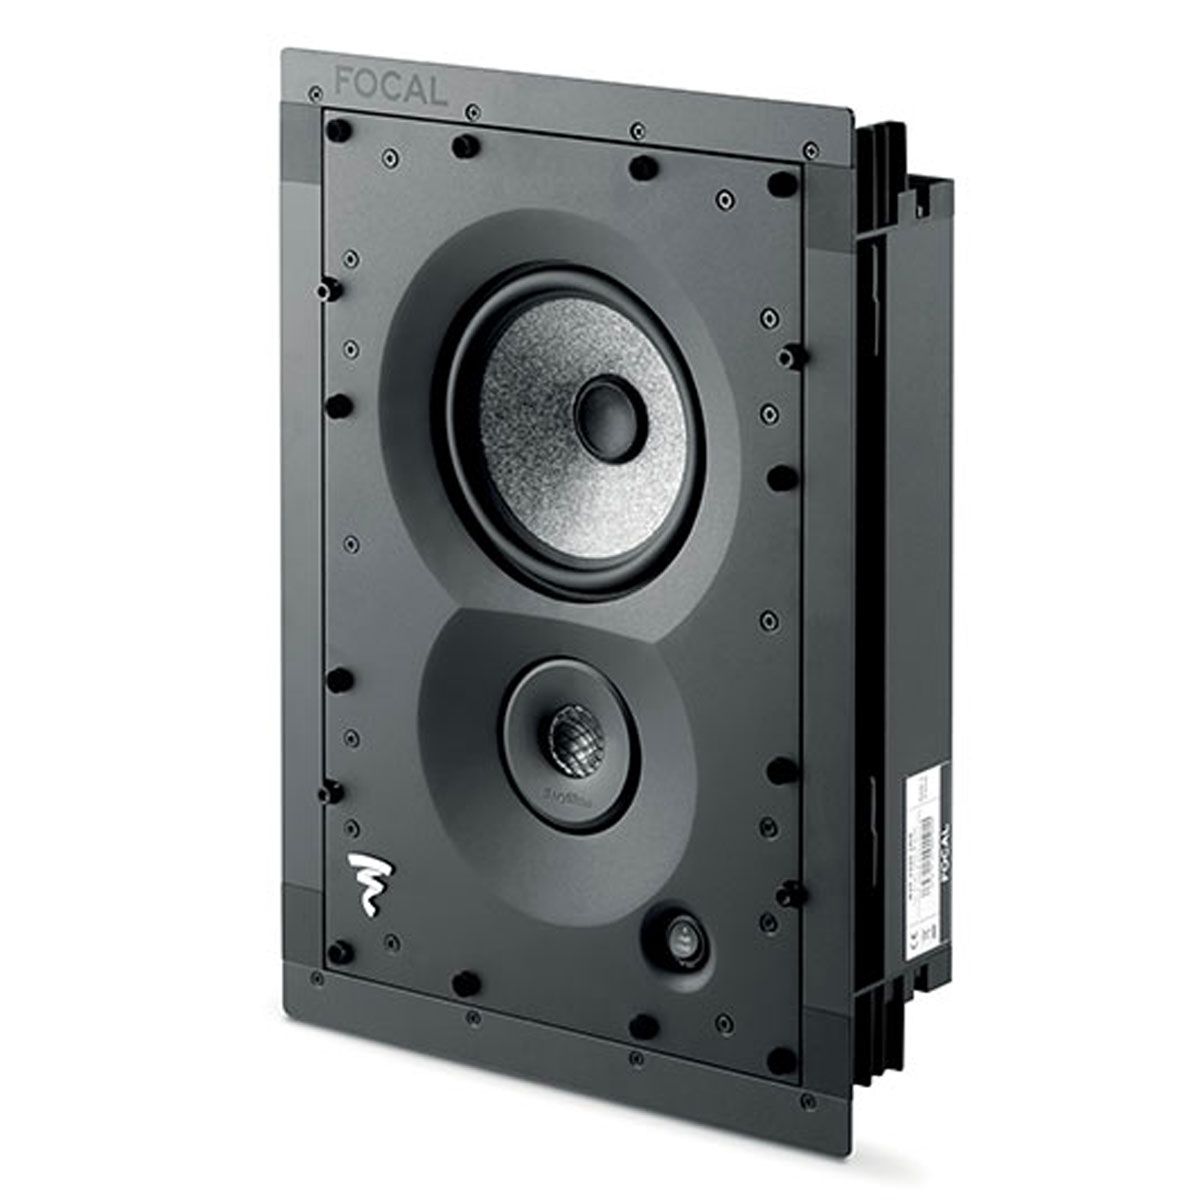 Focal 1000 IW6 In-Wall Loudspeaker angled front view without grille